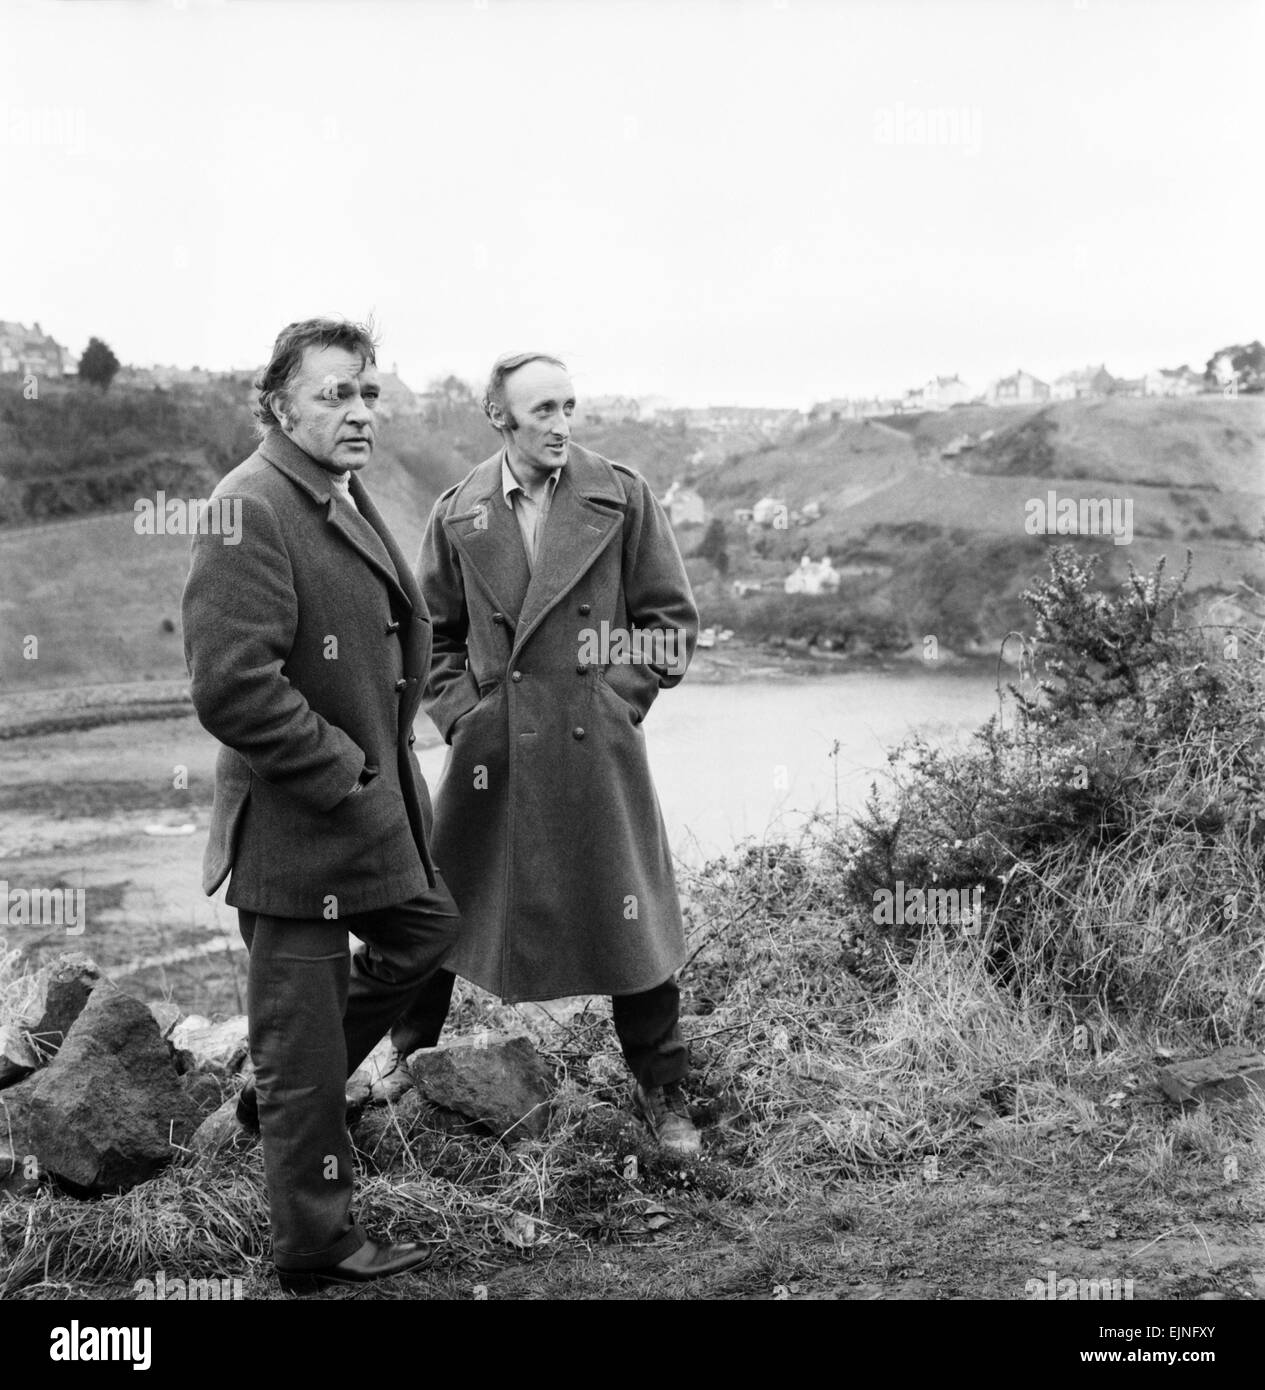 The locations for the film 'Under Milk Wood', depict the Welsh village of  Llaregub, So there in the village of Bugerall, Richard Burton contemplates  the scene. Fishguard is the location for this